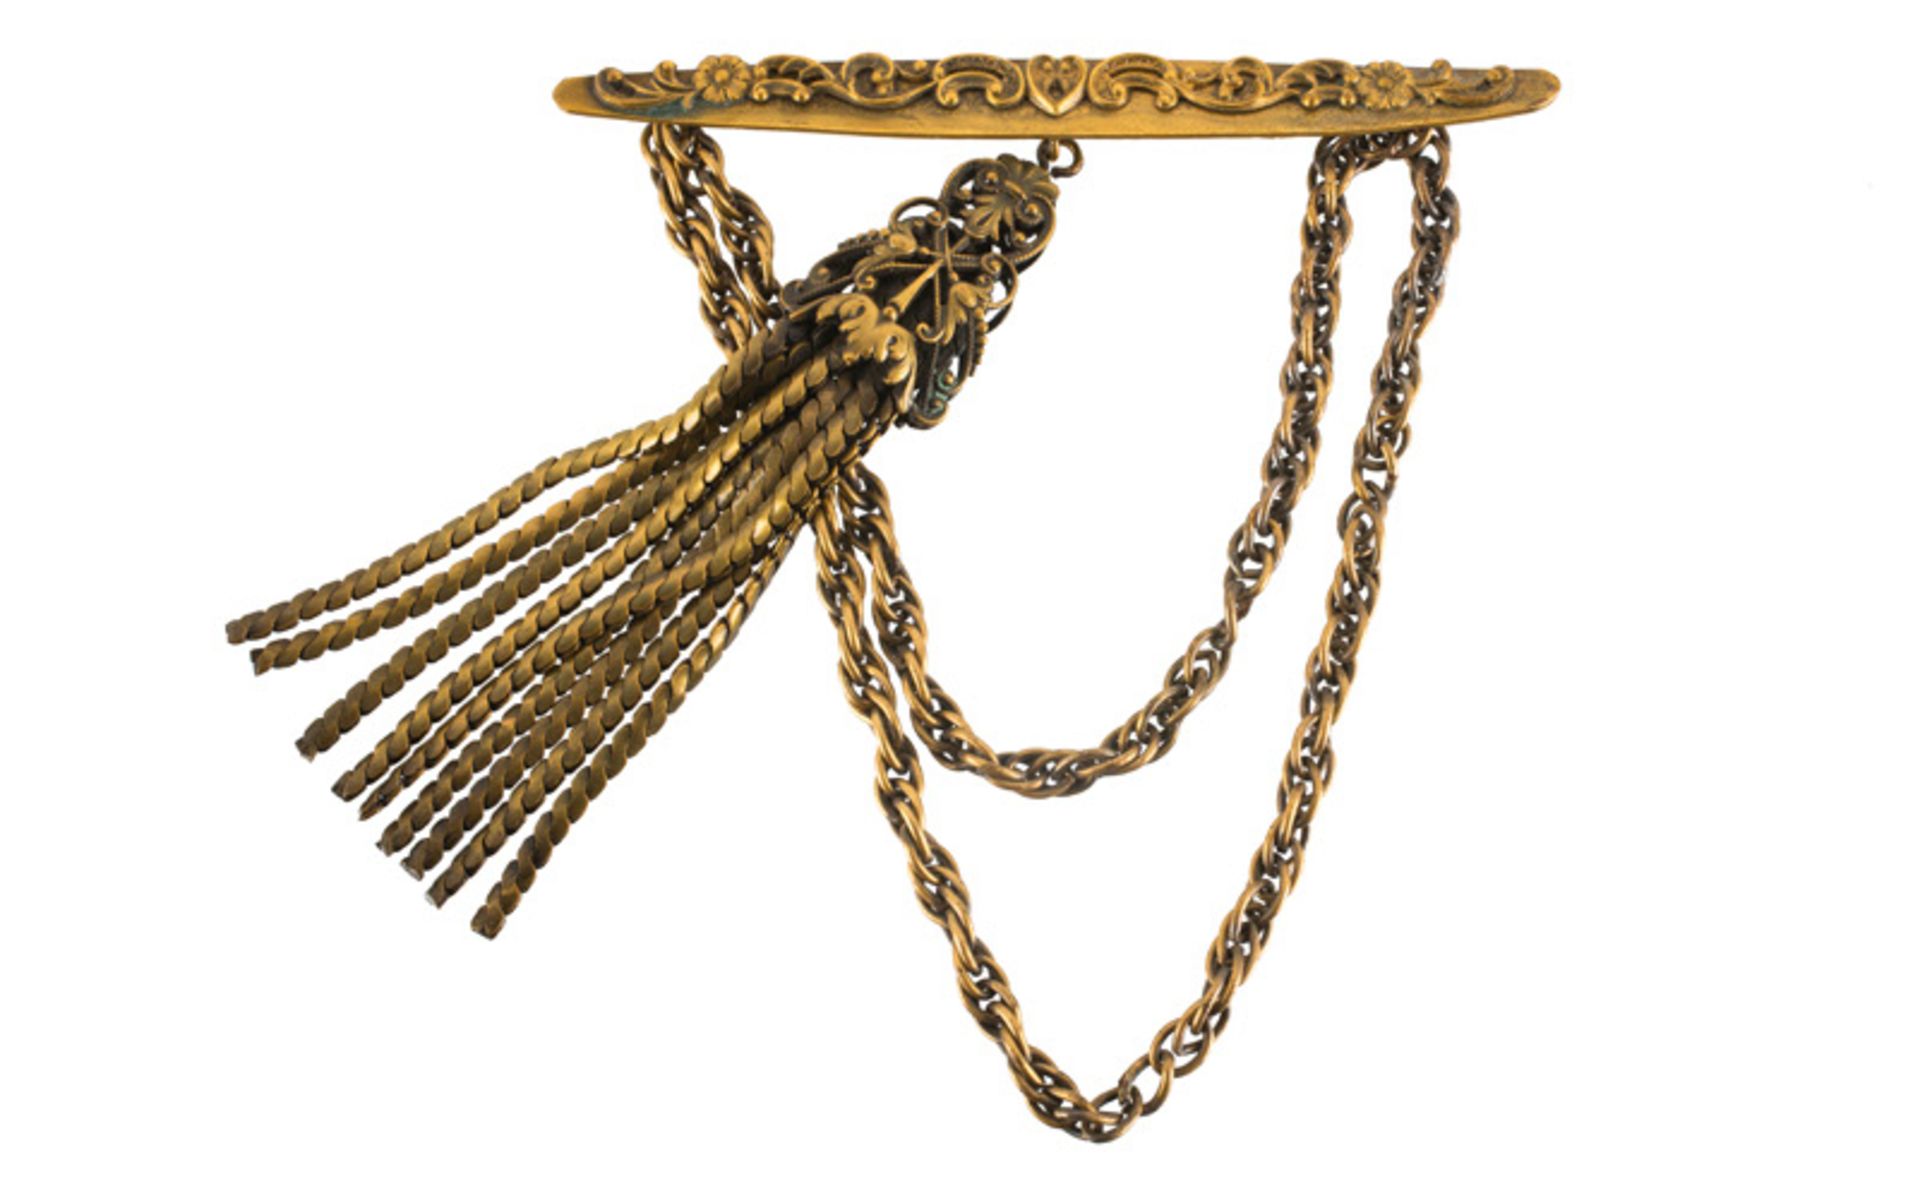 A Joseff Hollywood goldtone brooch with two chains and a pendant, decorated with scroll motifs. - Image 3 of 3